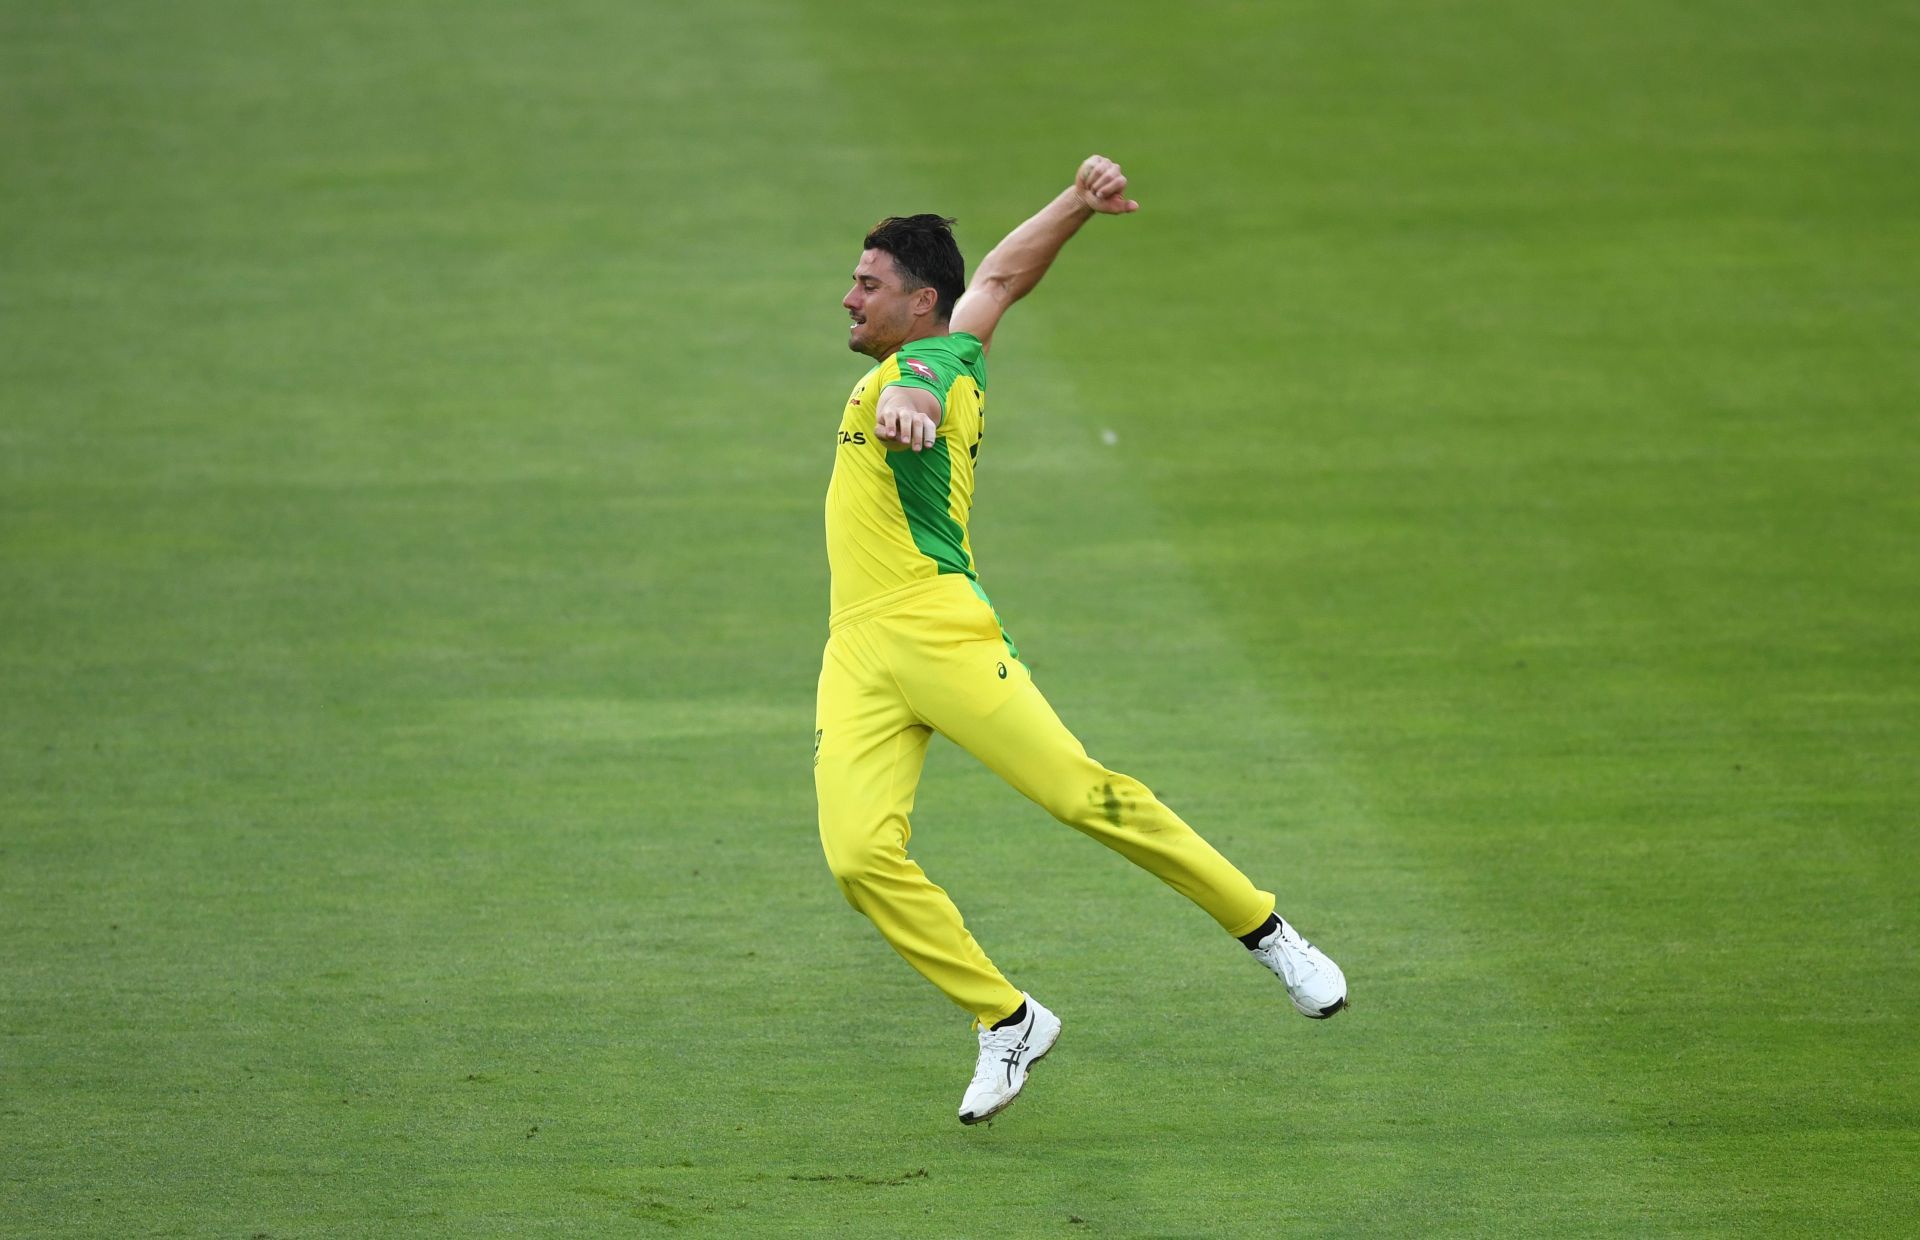 Marcus Stoinis. (Image source: Getty)